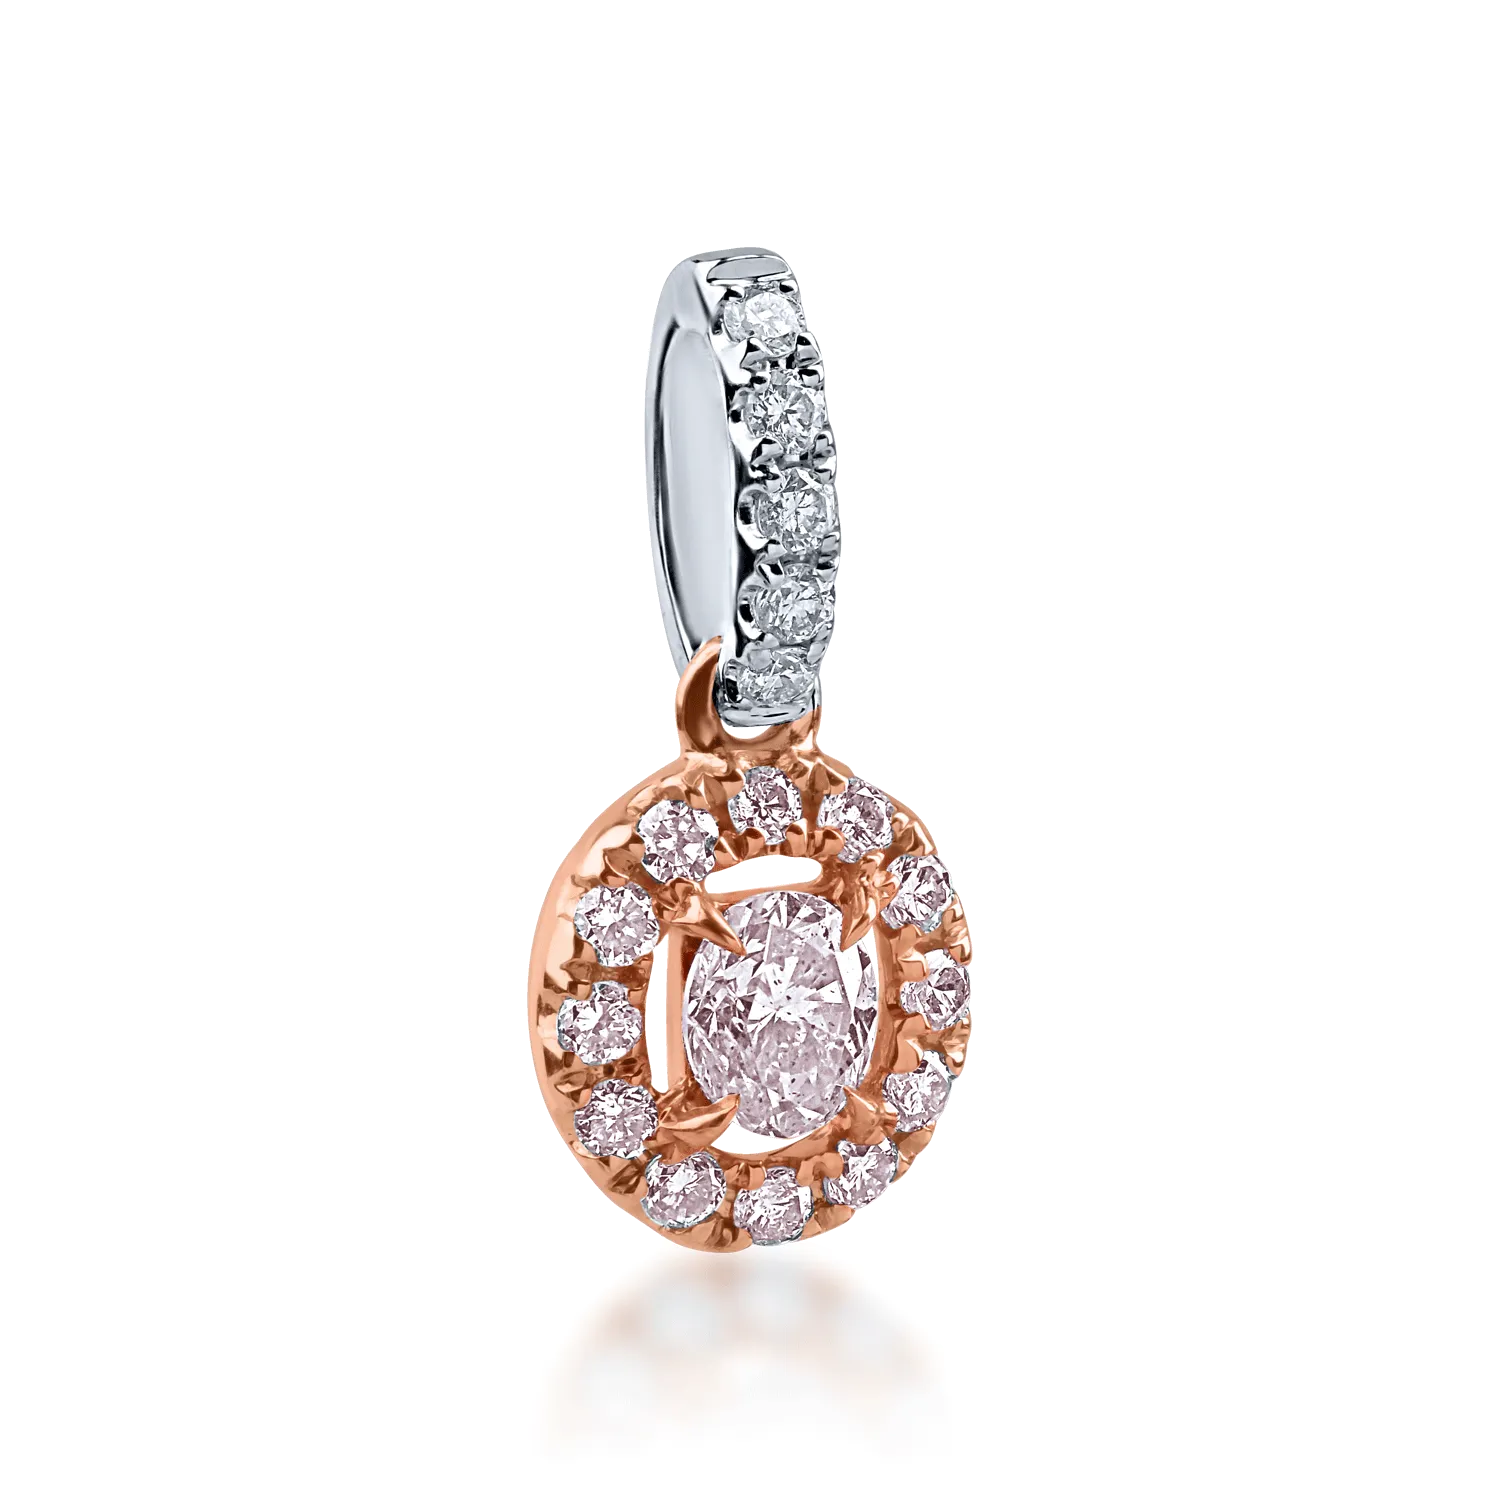 White-rose gold pendant with 0.124ct fancy pink diamond and 0.102ct diamonds